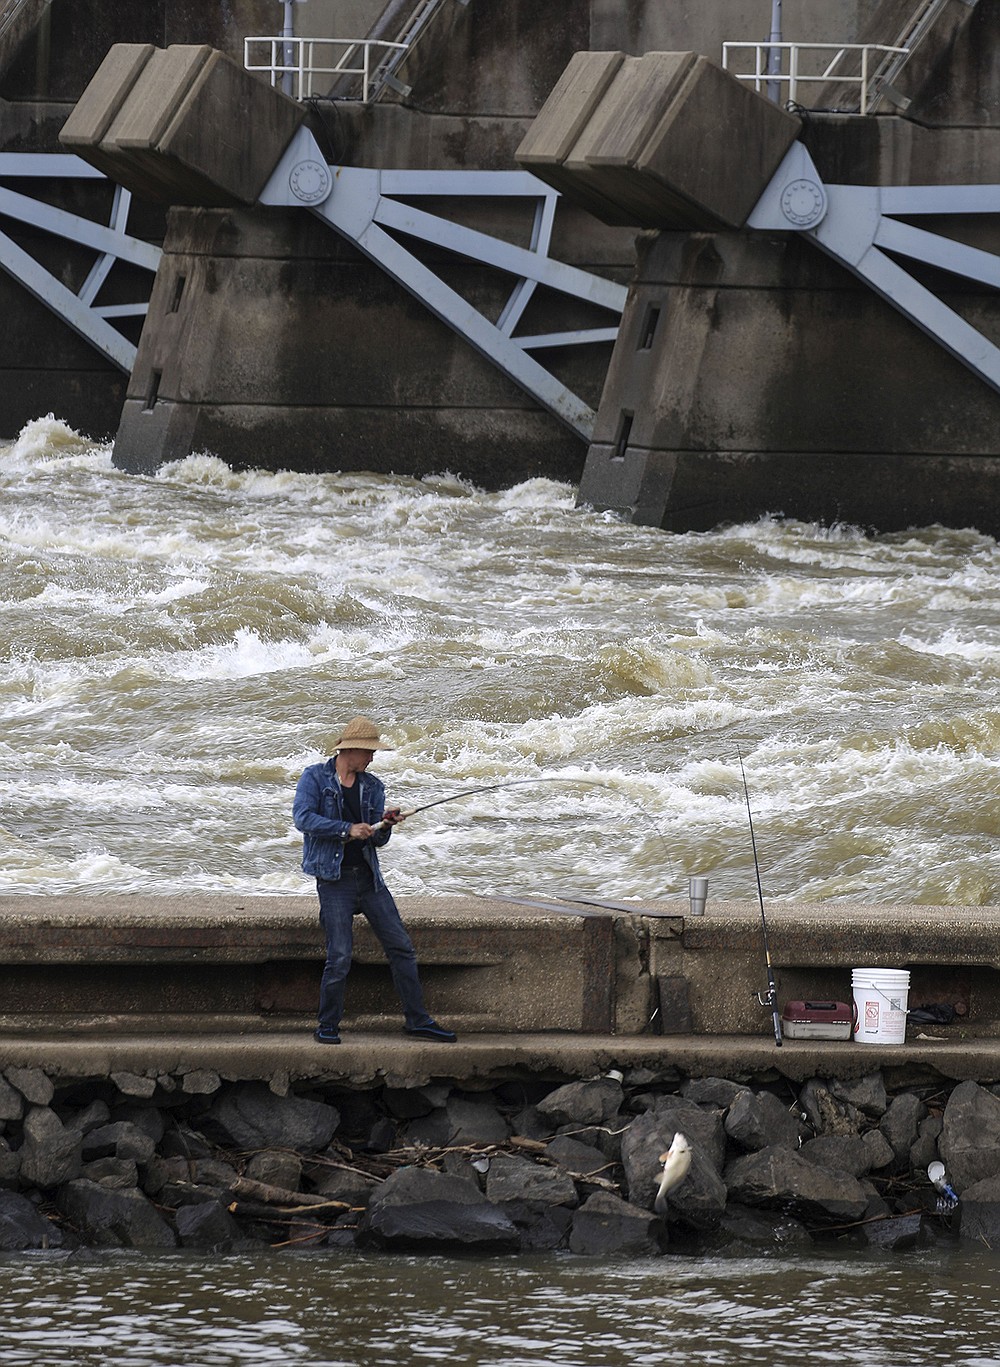 Water rushes through the gates at Murray Lock and Dam on Thursday as a fisherman lands a fish at Cook’s Landing in North Little Rock. The U.S. Army Corps of Engineers Little Rock District issued a small-craft advisory for the McClellan-Kerr Arkansas River Navigation System in Arkansas. Rainfall in eastern Oklahoma and western Arkansas is raising water flows. Small-craft advisories are issued when flows exceed 70,000 cubic feet per second.
(Arkansas Democrat-Gazette/Staton Breidenthal)